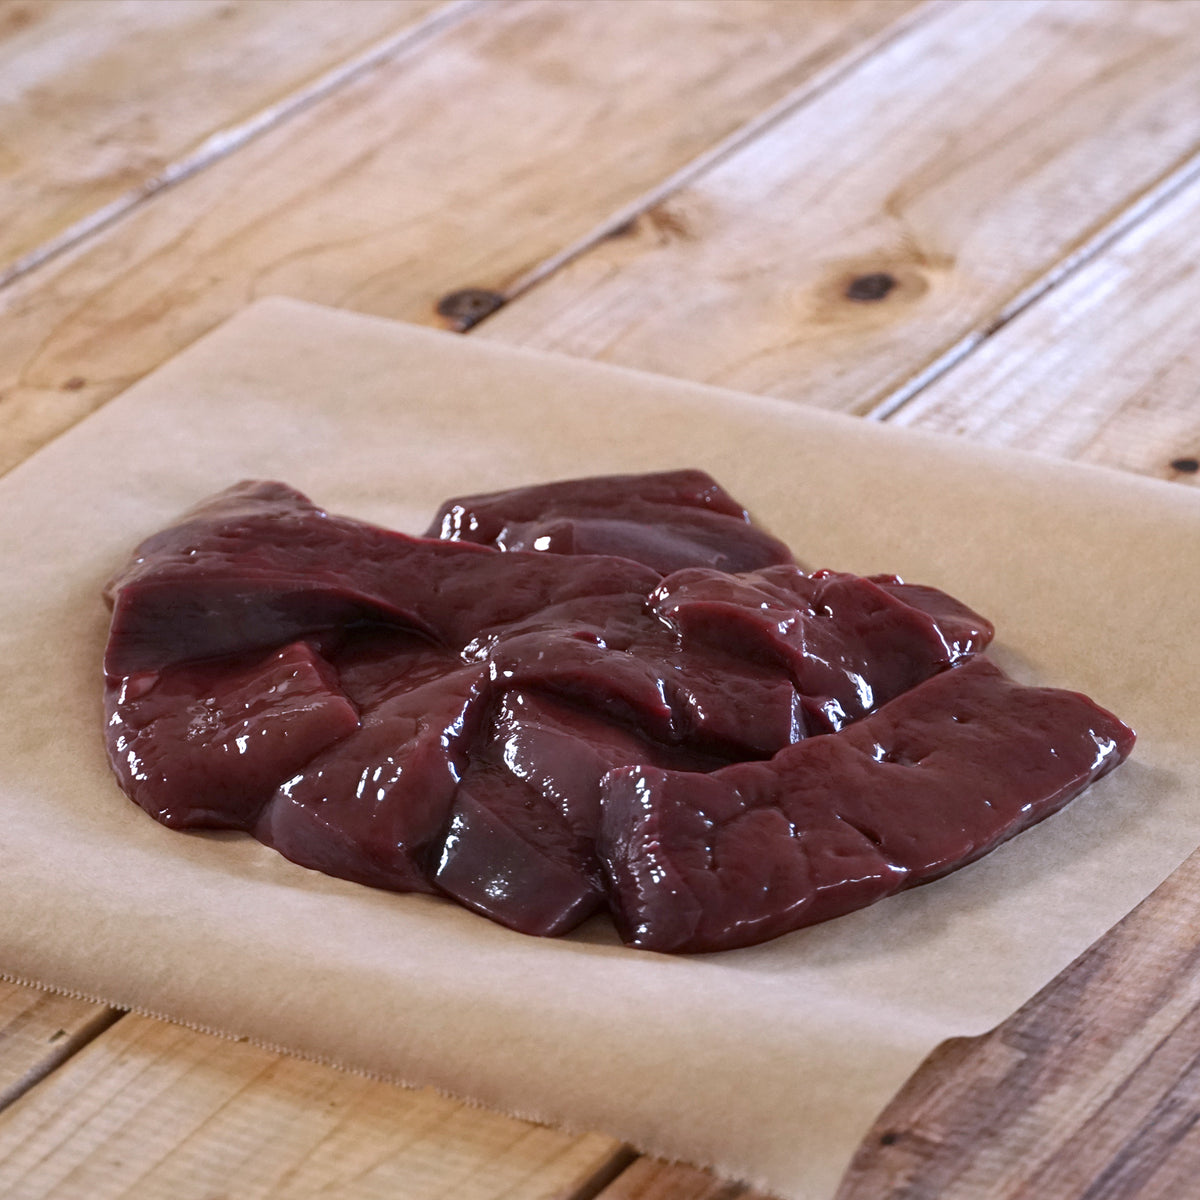 Grass-Fed Beef Liver Slices from Australia (300g) - Horizon Farms